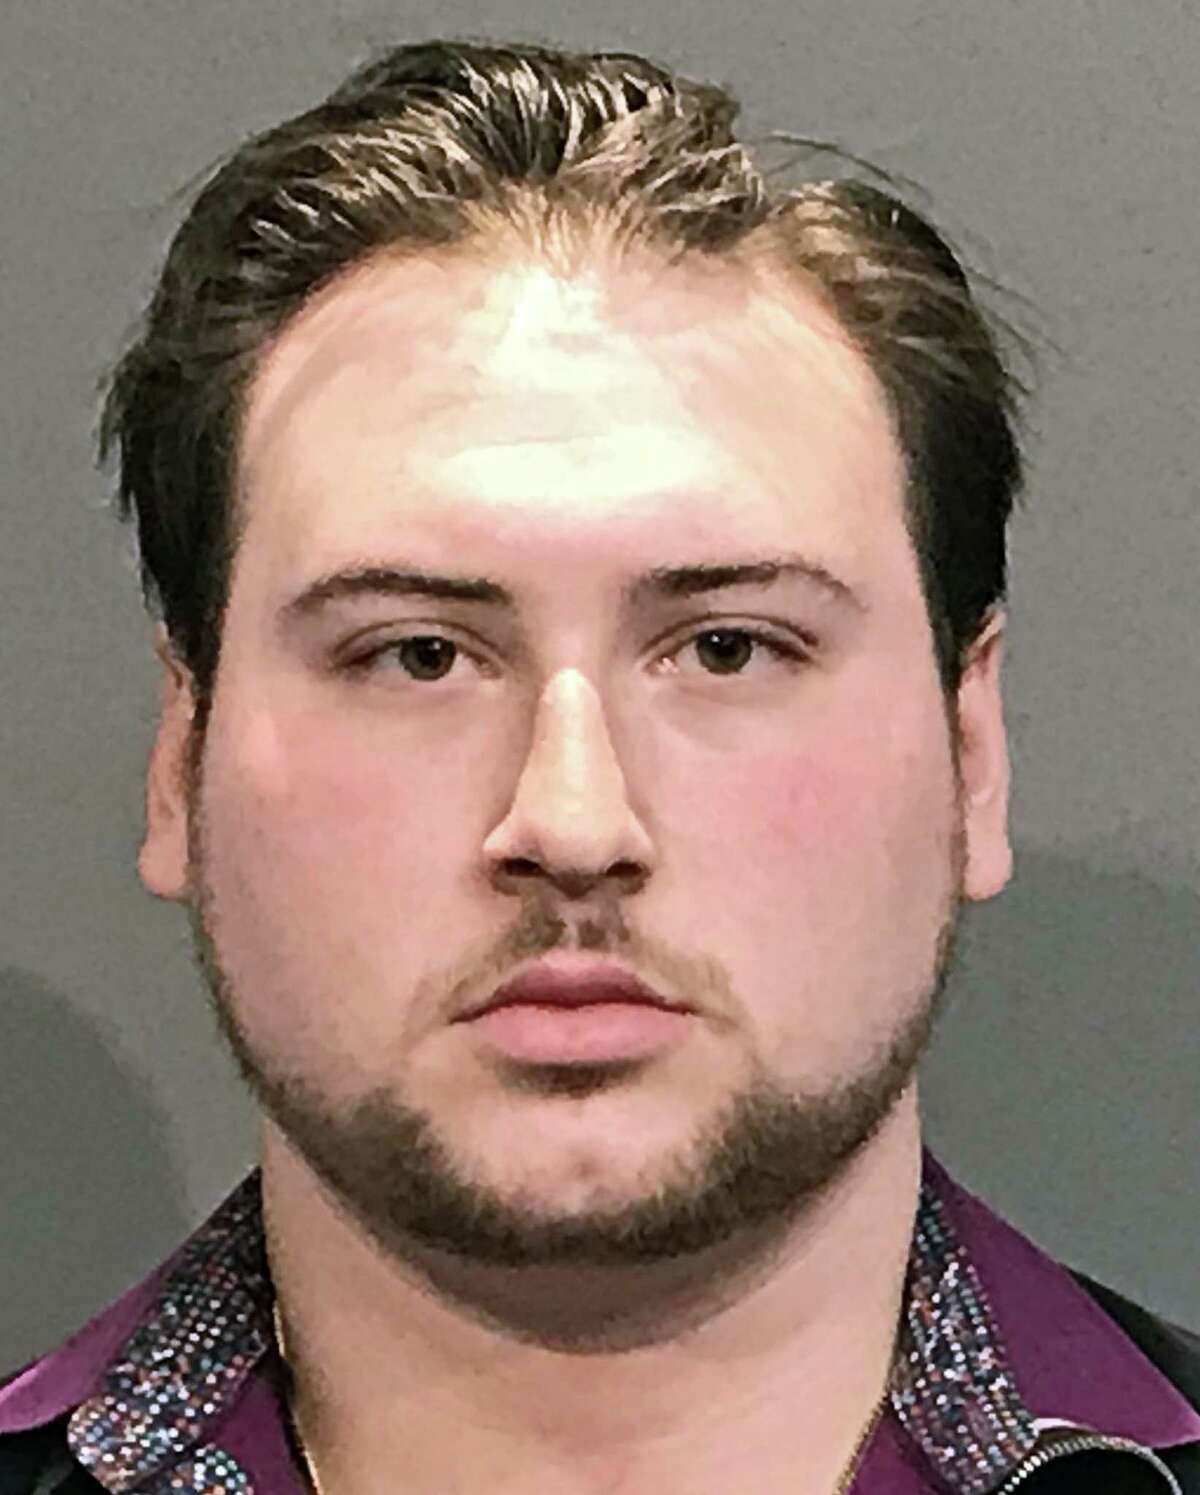 Southbury hunters - arrested in October 2018 for illegal jacklighting of deer - have been arrested again after new evidence surfaced. Eftihios Marnelakis, 23, was charged with the following violations: Making false statement, interfering with an officer, illegal transport of deer killed or hit by motor vehicle without a permit, violation of conditions of release, jacklighting deer, failure to report deer kill, negligent hunting in the second degree, negligent hunting in the third degree, negligent hunting in the fourth degree, conspiracy to commit negligent hunting in the second degree, conspiracy to commit negligent hunting in the third degree, conspiracy to commit negligent hunting in the fourth degree and conspiracy to commit illegal sale of game.